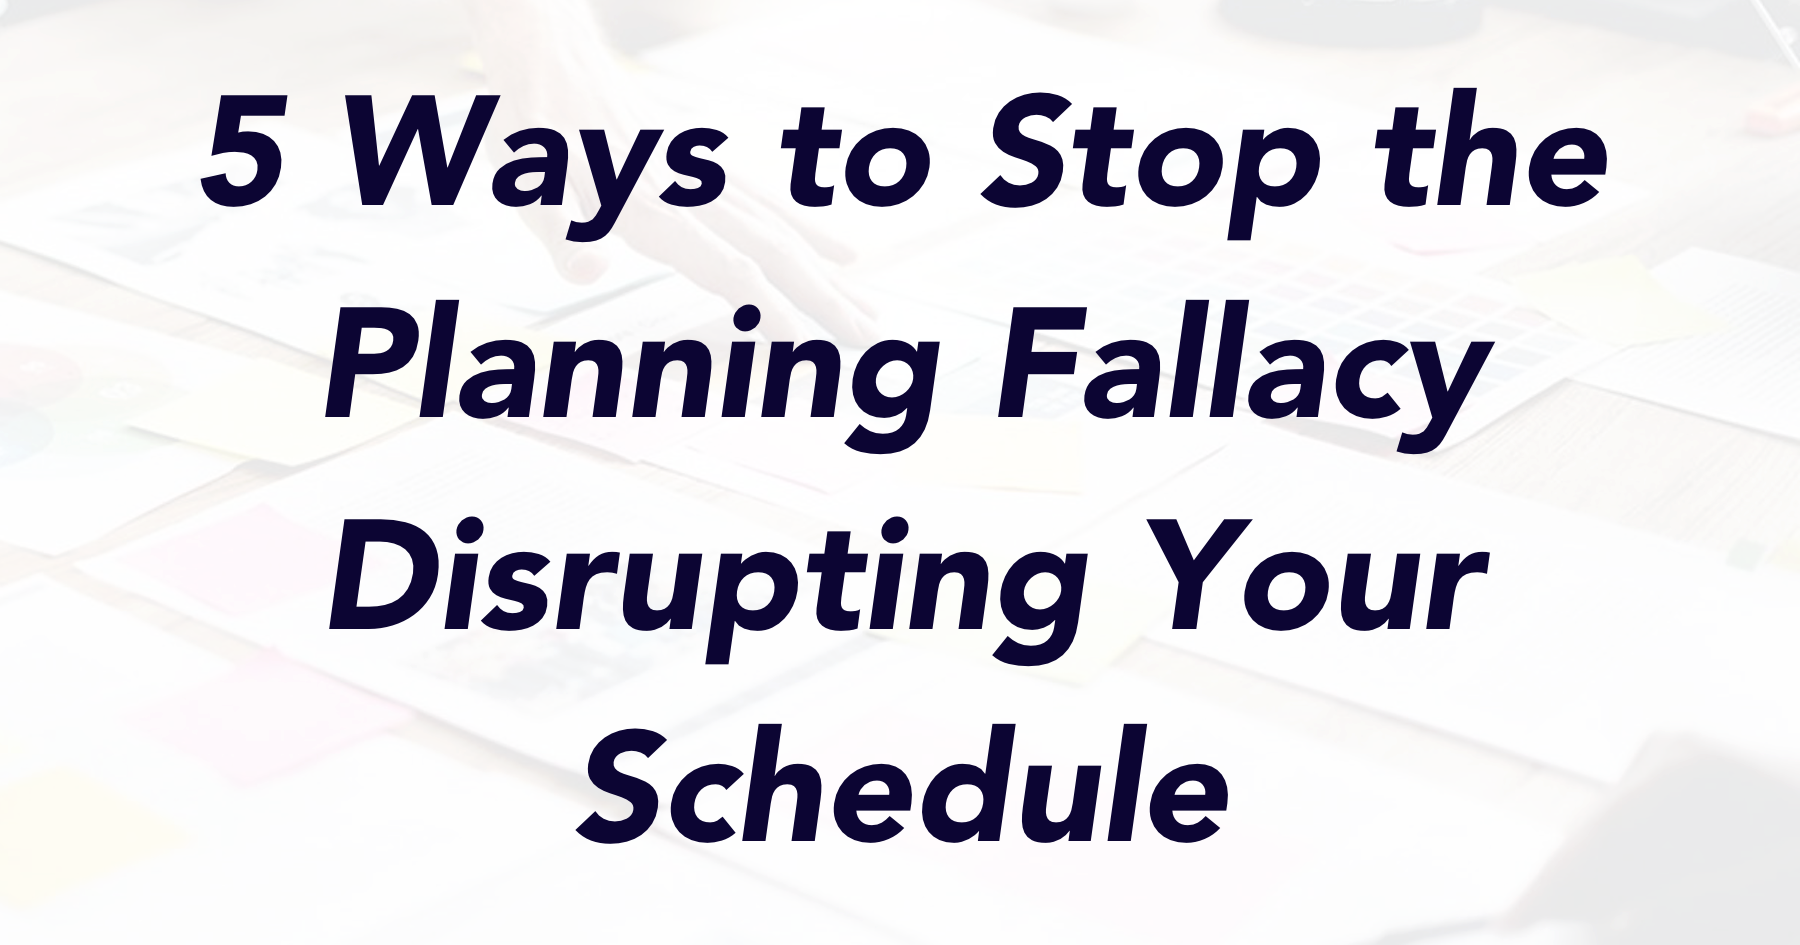 Ways to Stop the Planning Fallacy Disrupting Your Schedule